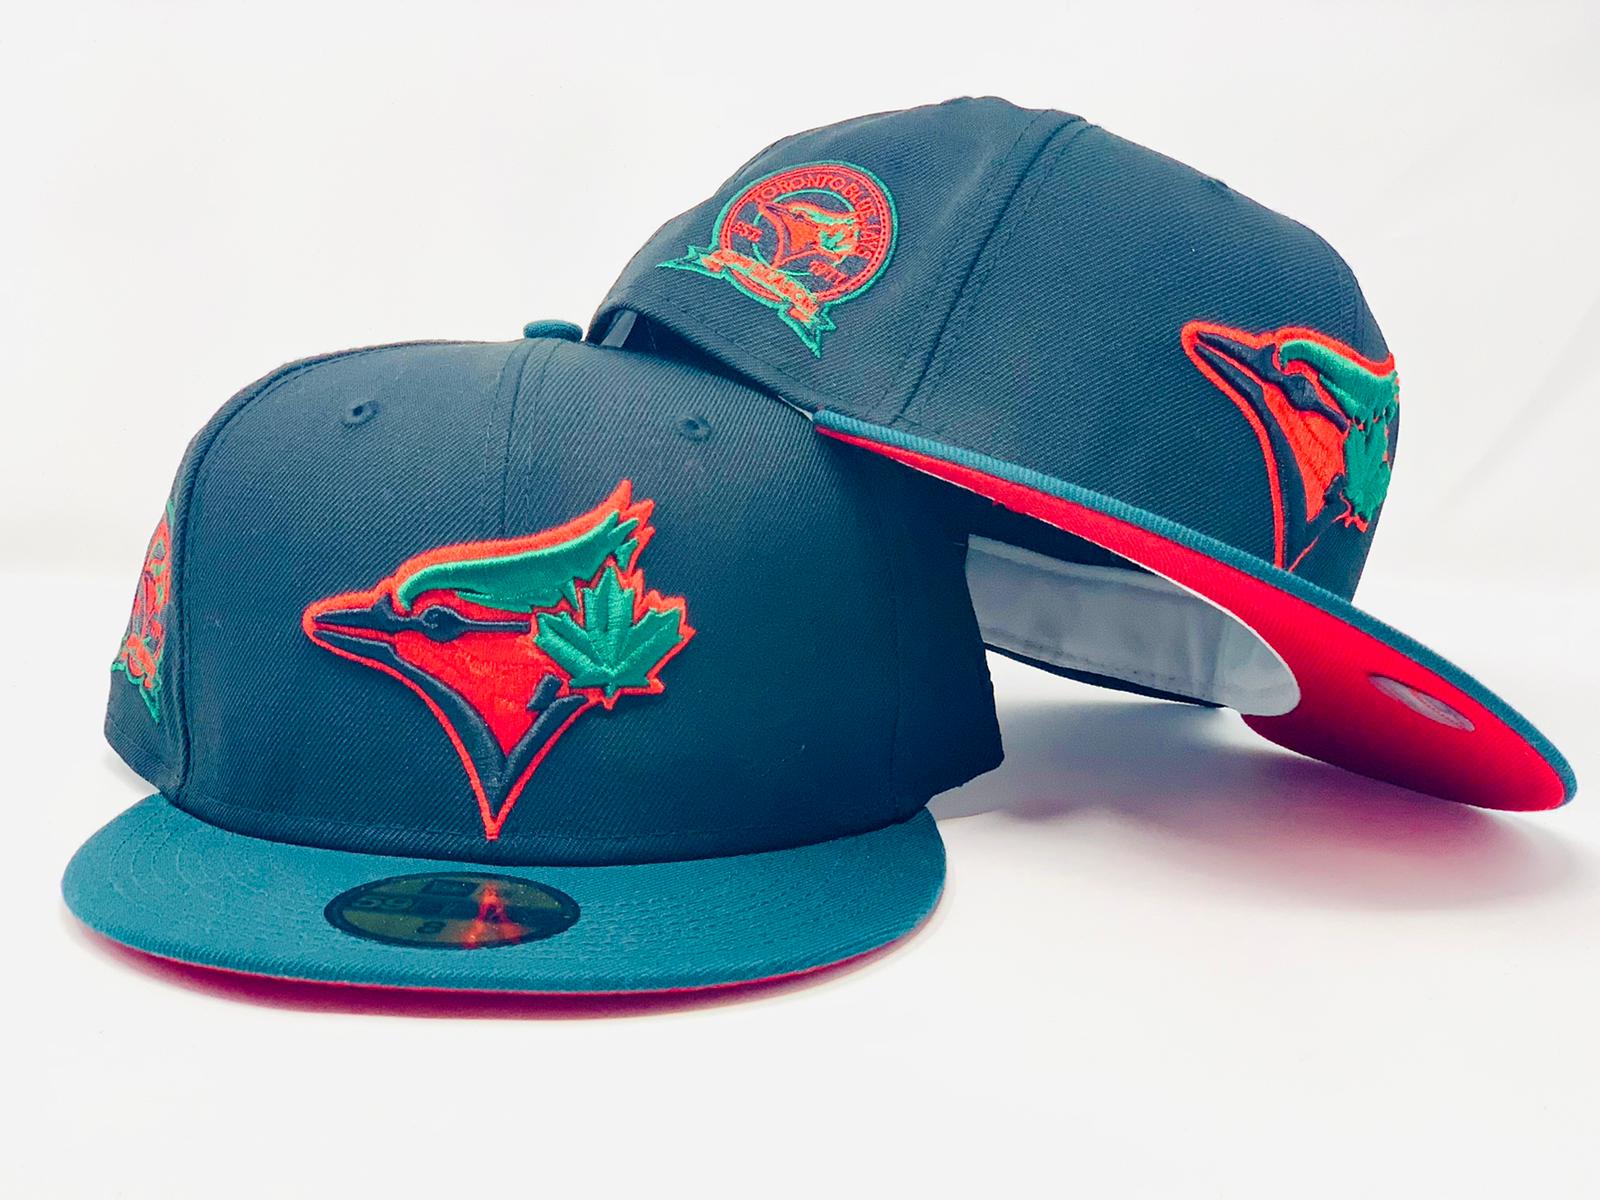 The Coolest Toronto Blue Jays Vintage-Inspired Tees, Hats, and